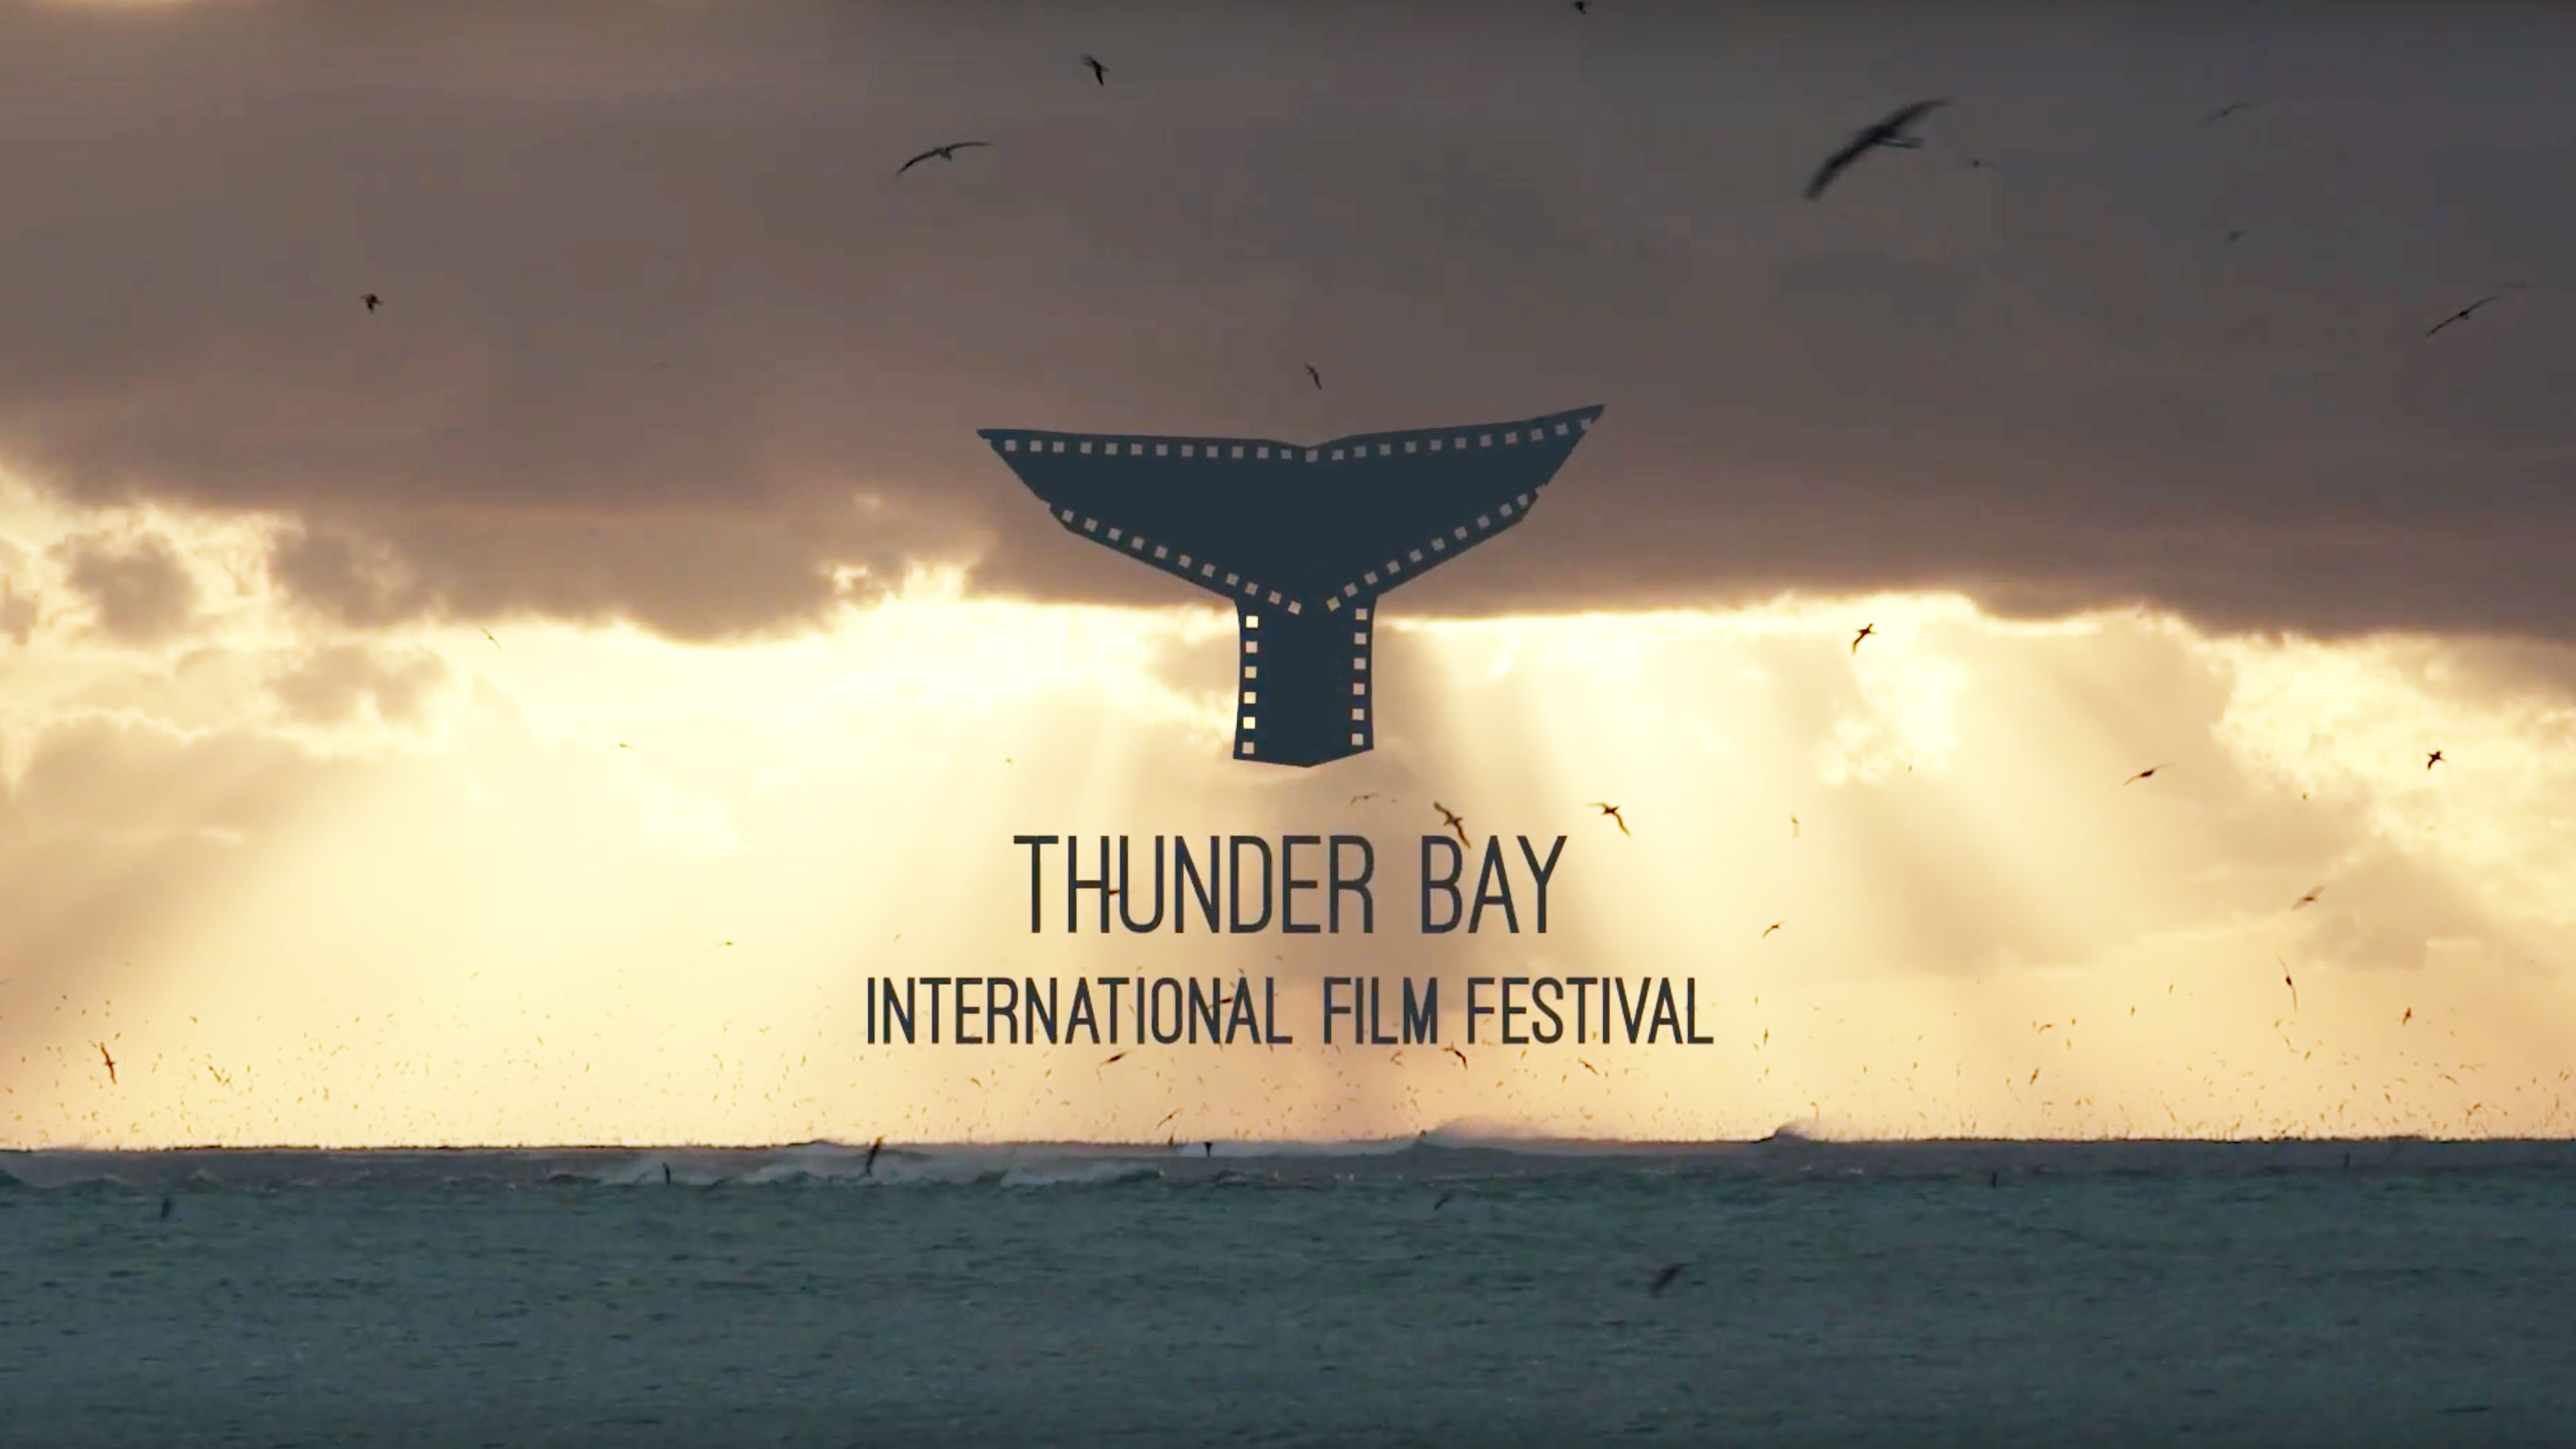 The Show Will Go On! Thunder Bay International Film Festival Tickets on Sale Now